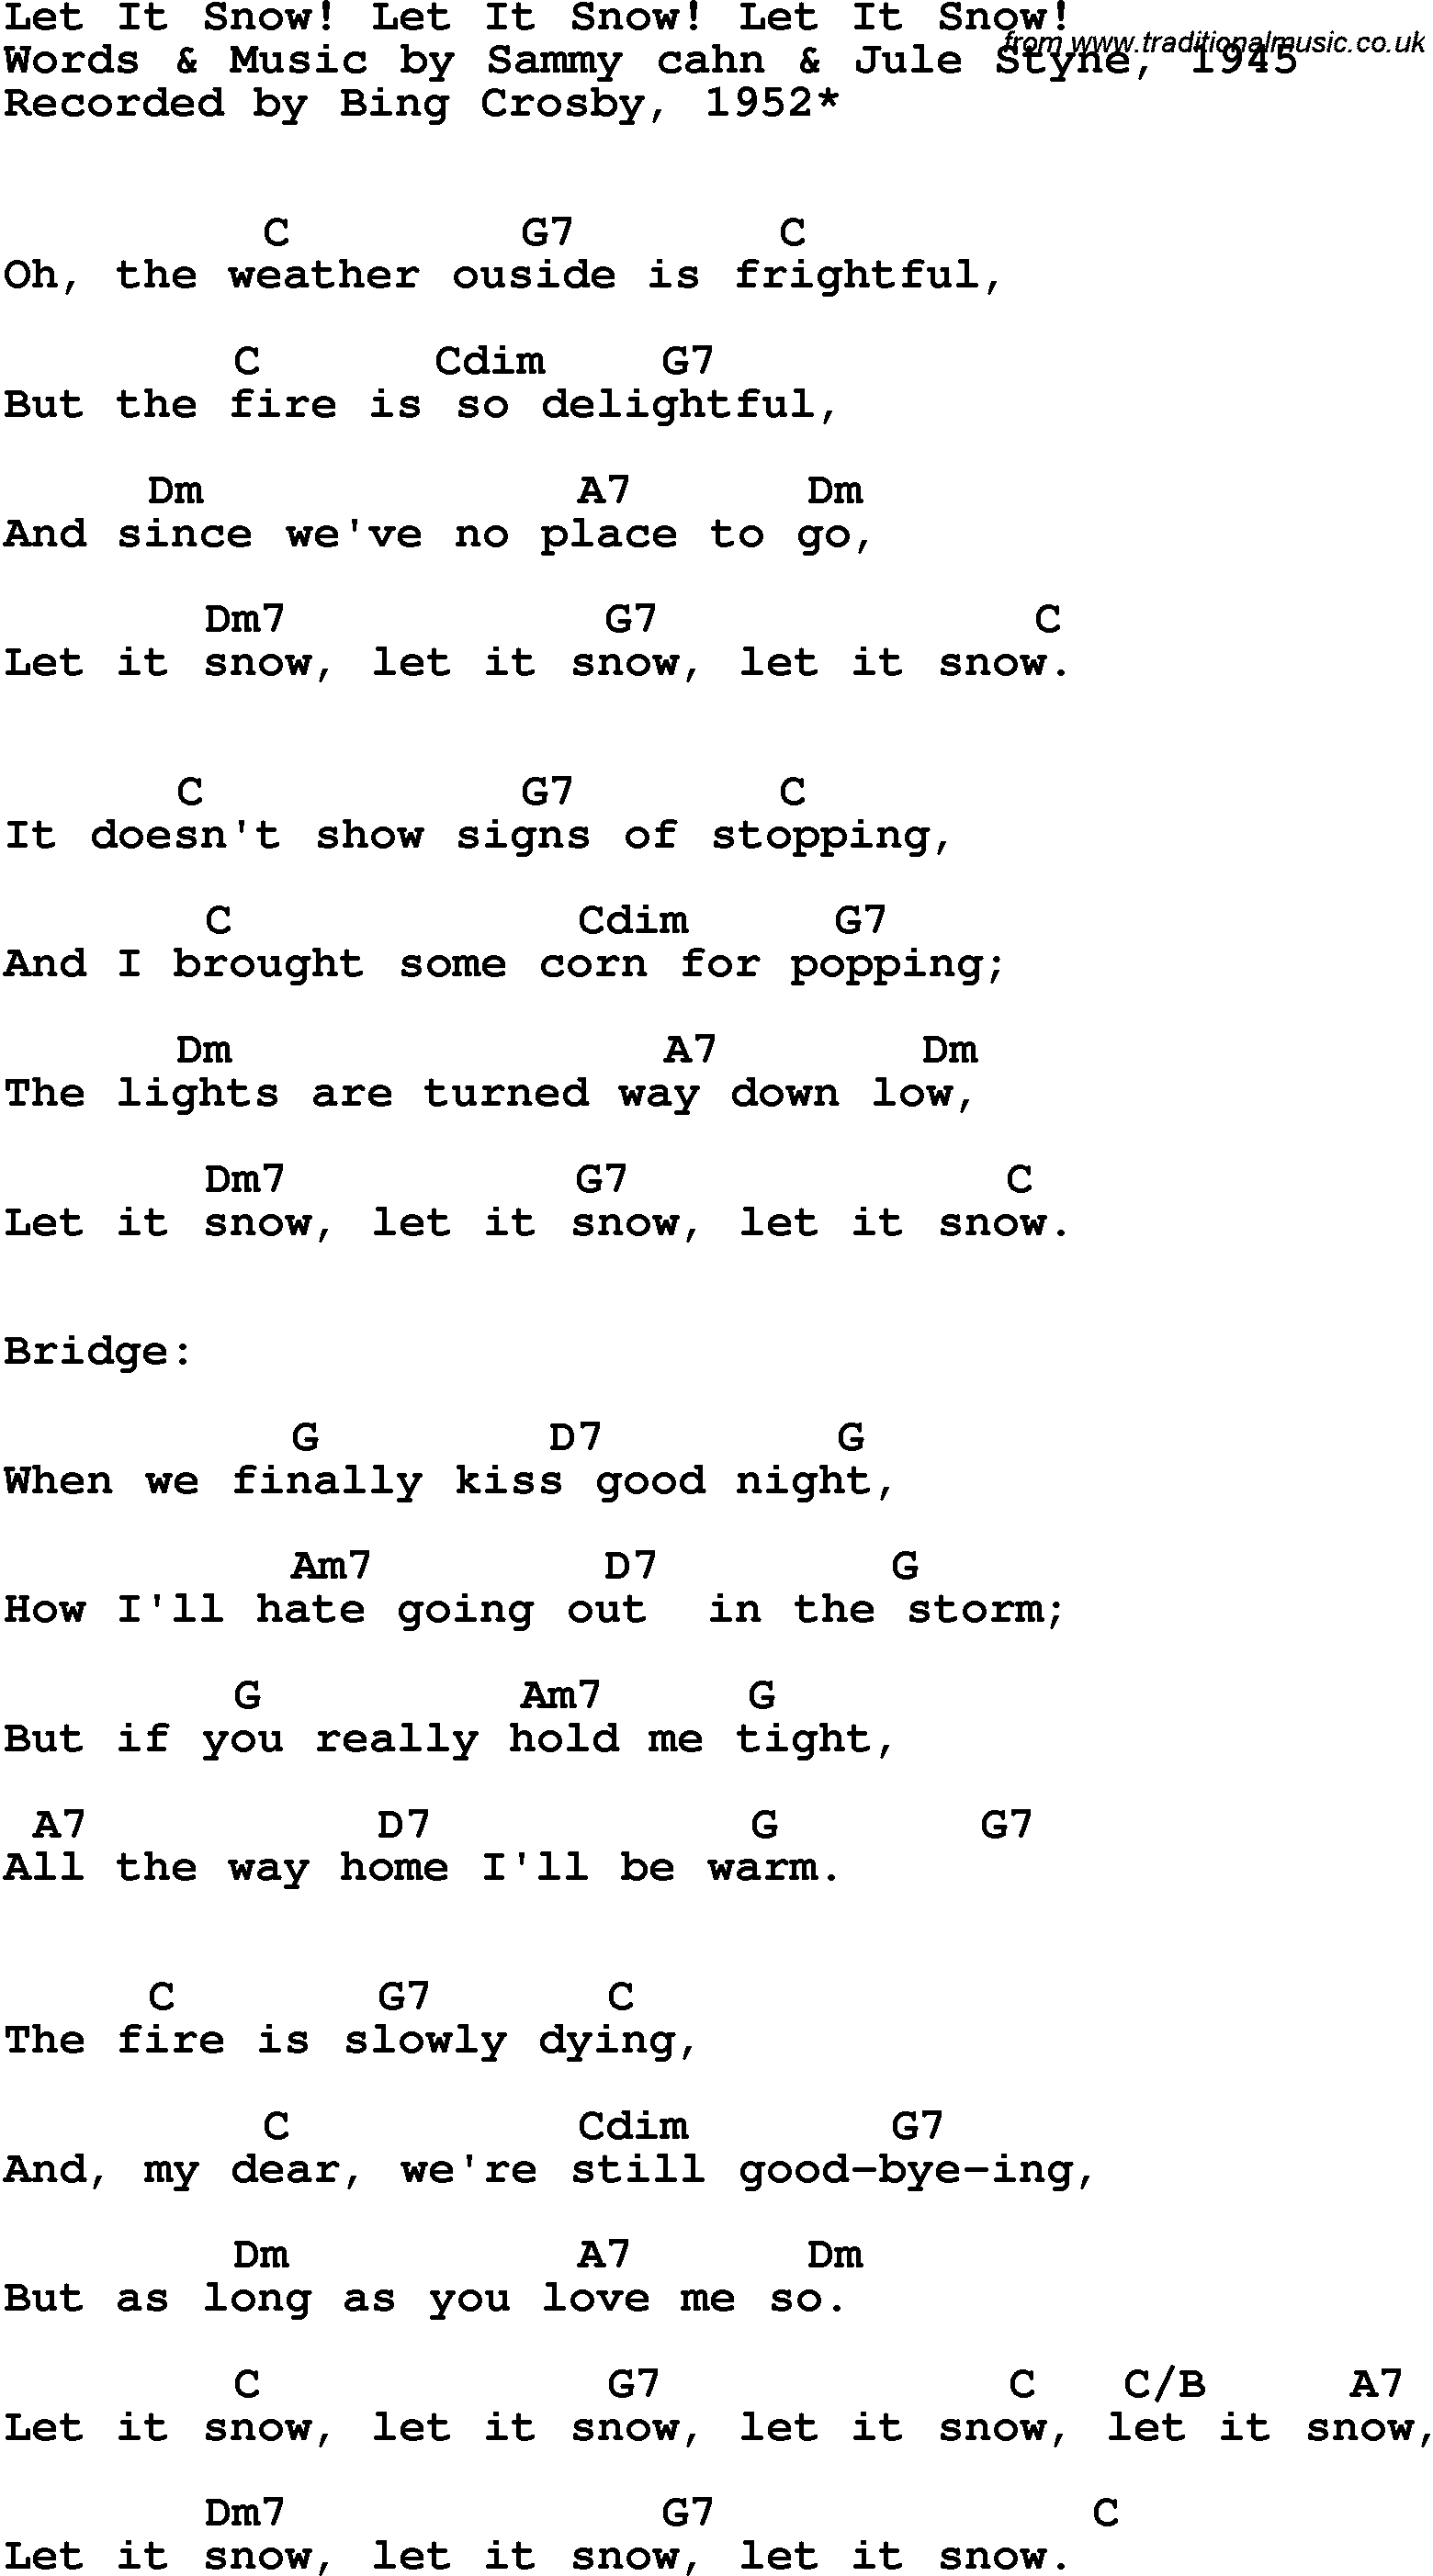 Song lyrics with guitar chords for Let It Snow! - Bing Crosby, 1952